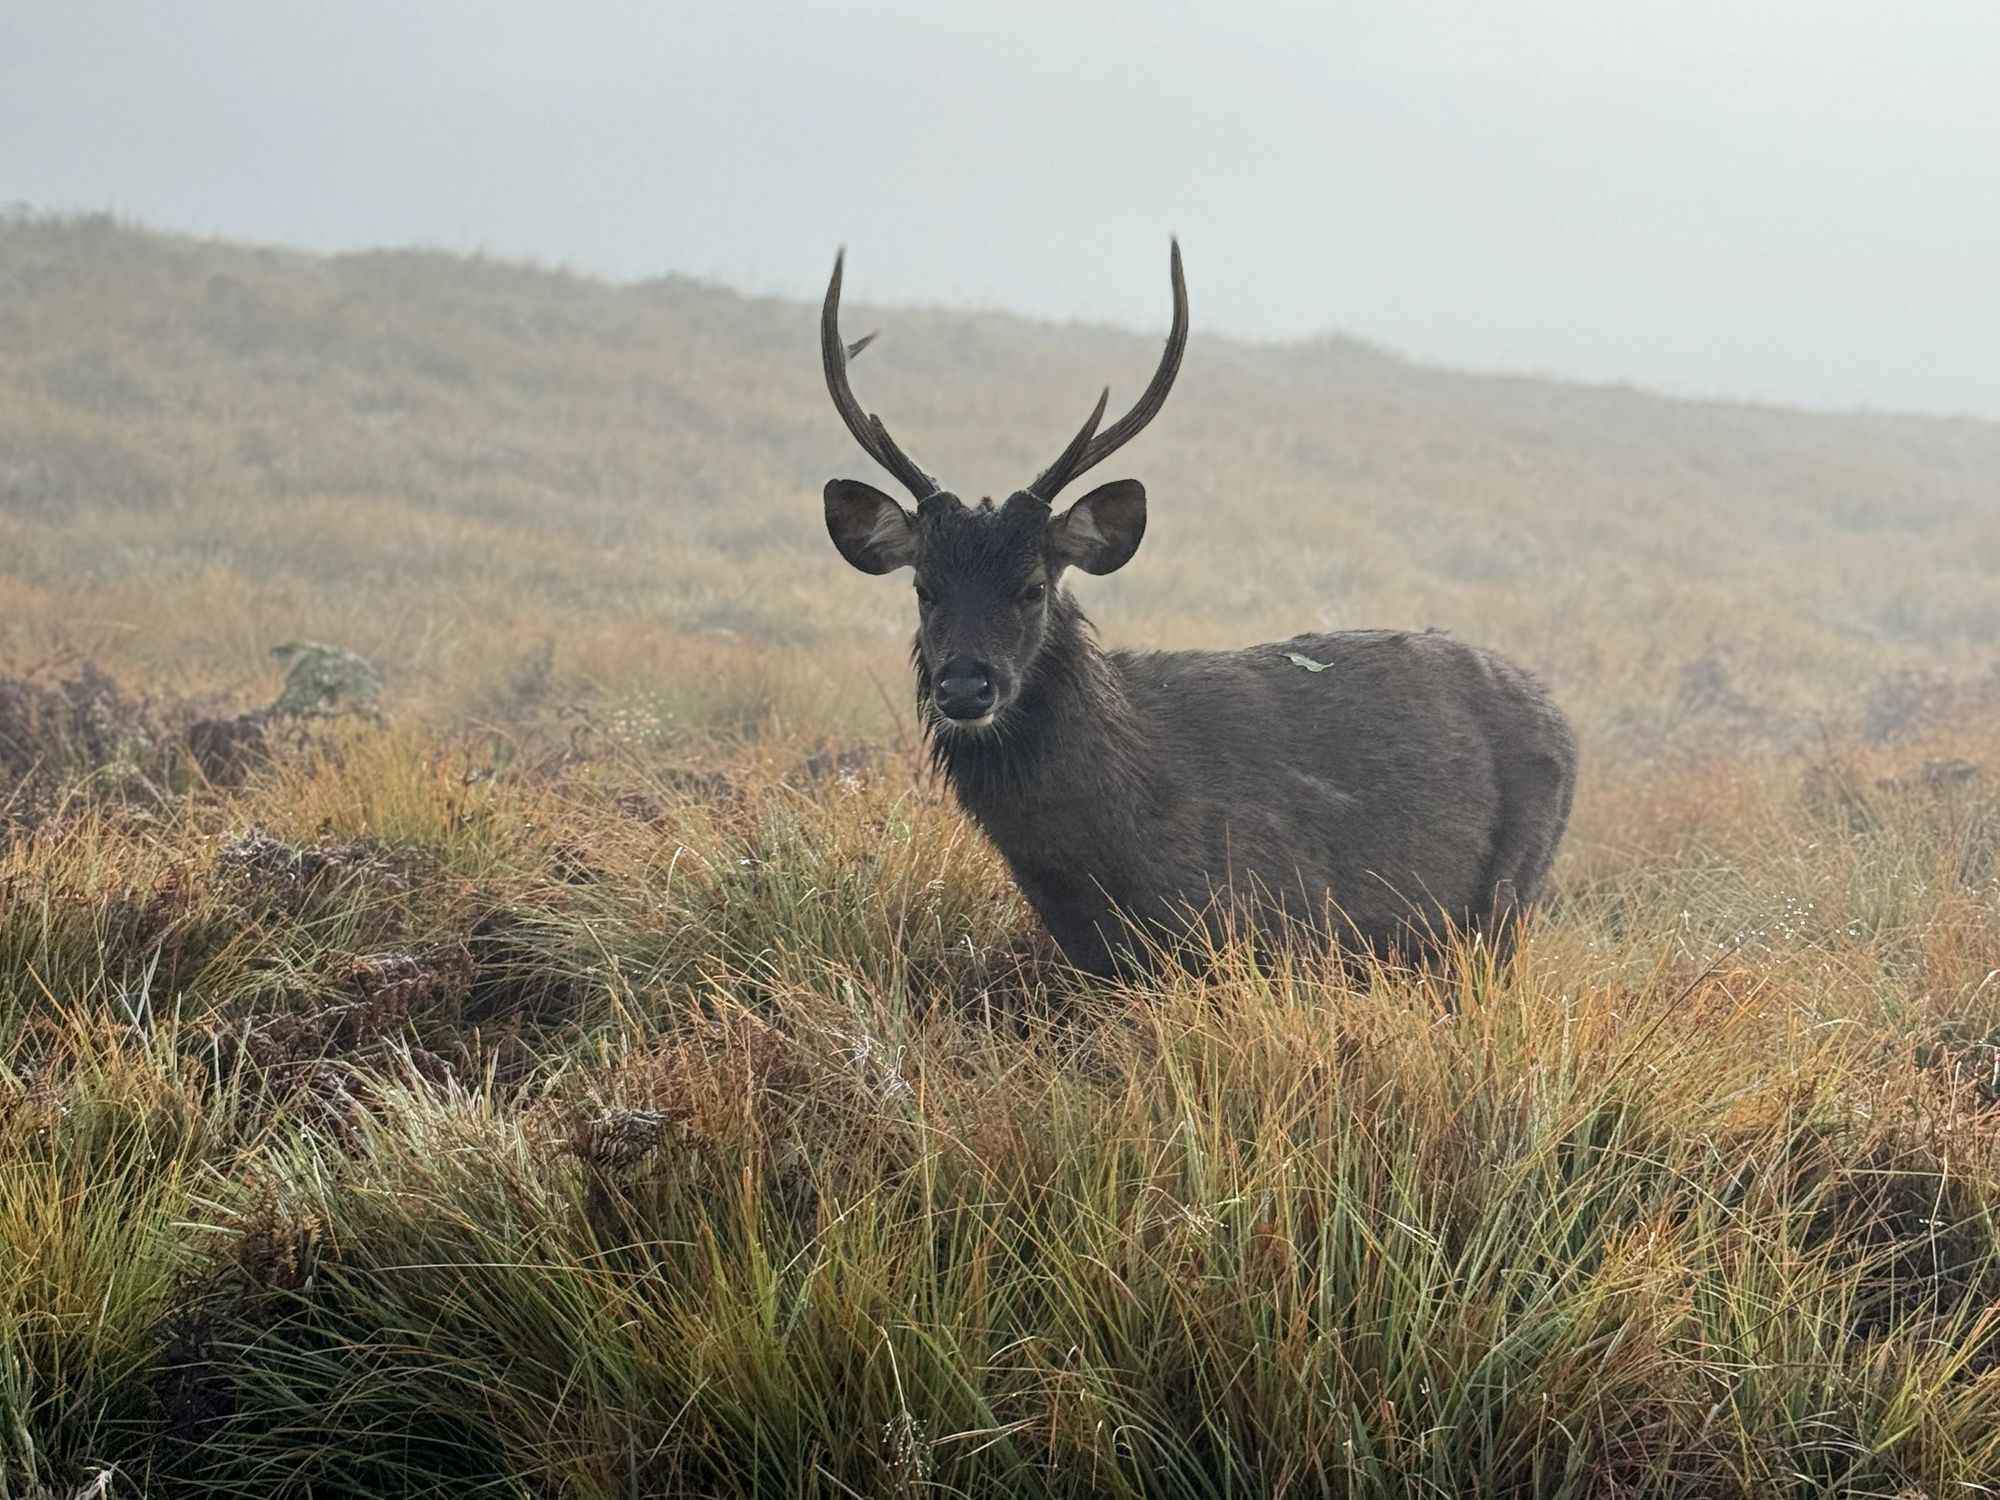 A sambar stag stands in the mist among grassy plains.